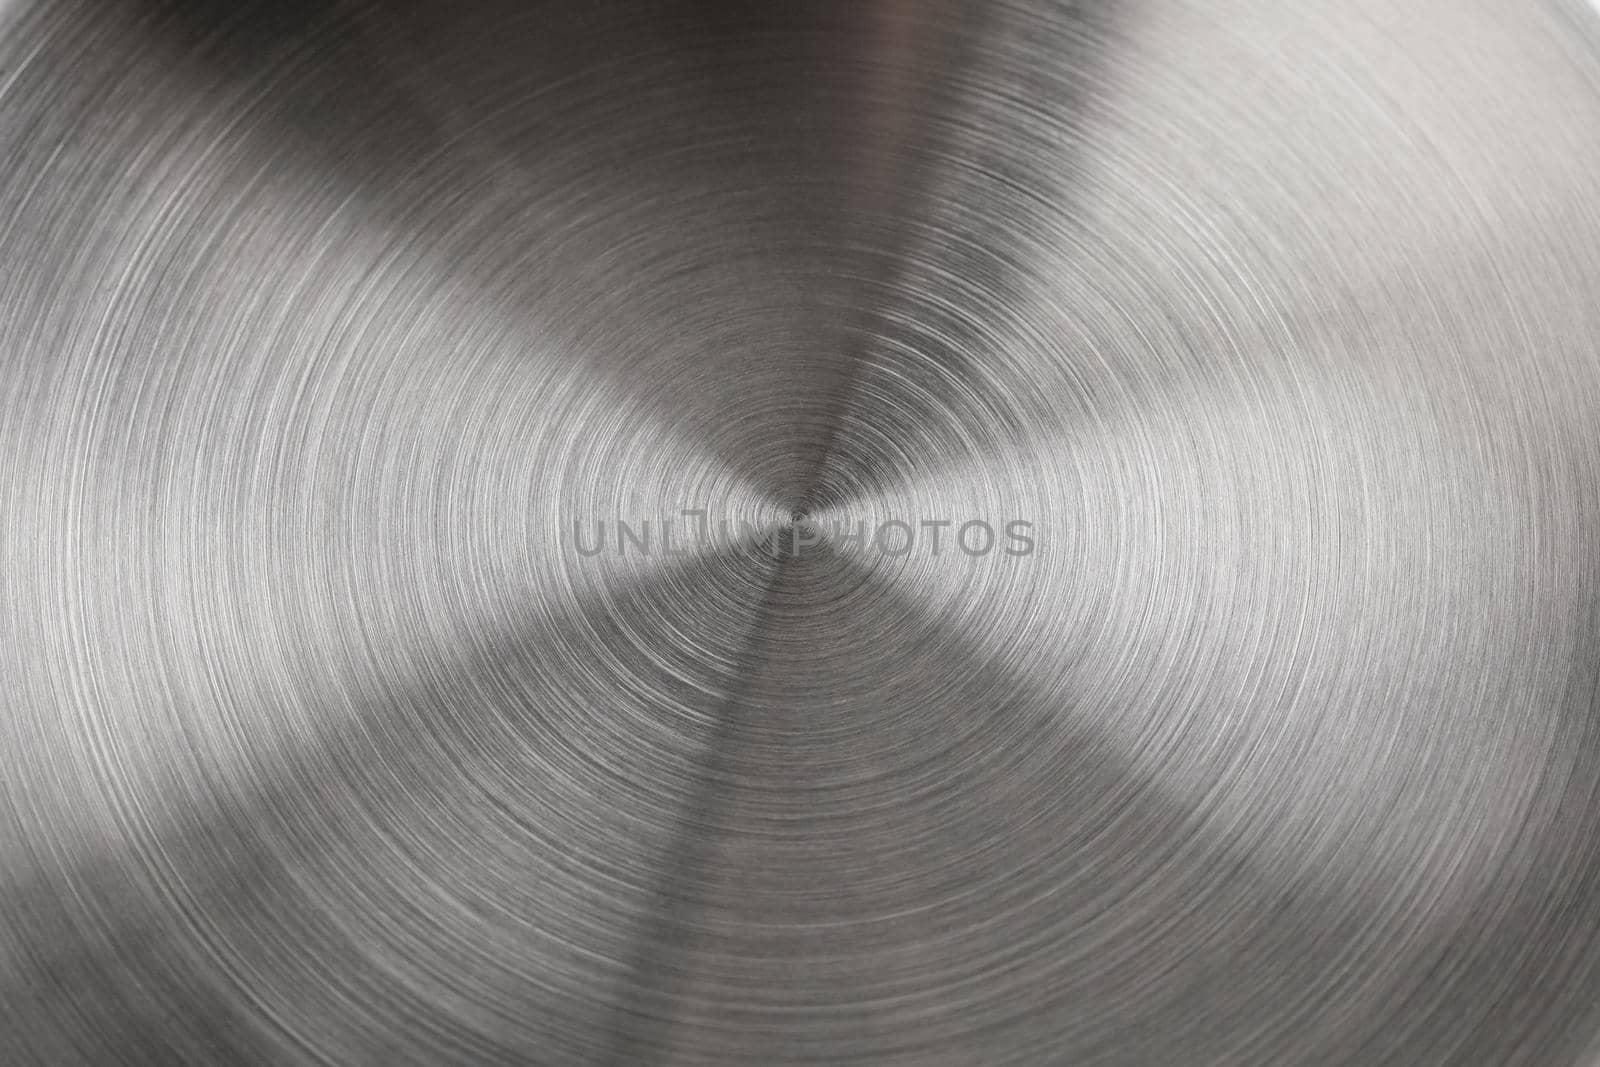 real concentric brushed stainless steel background of new saucepan bottom, close-up with selective focus